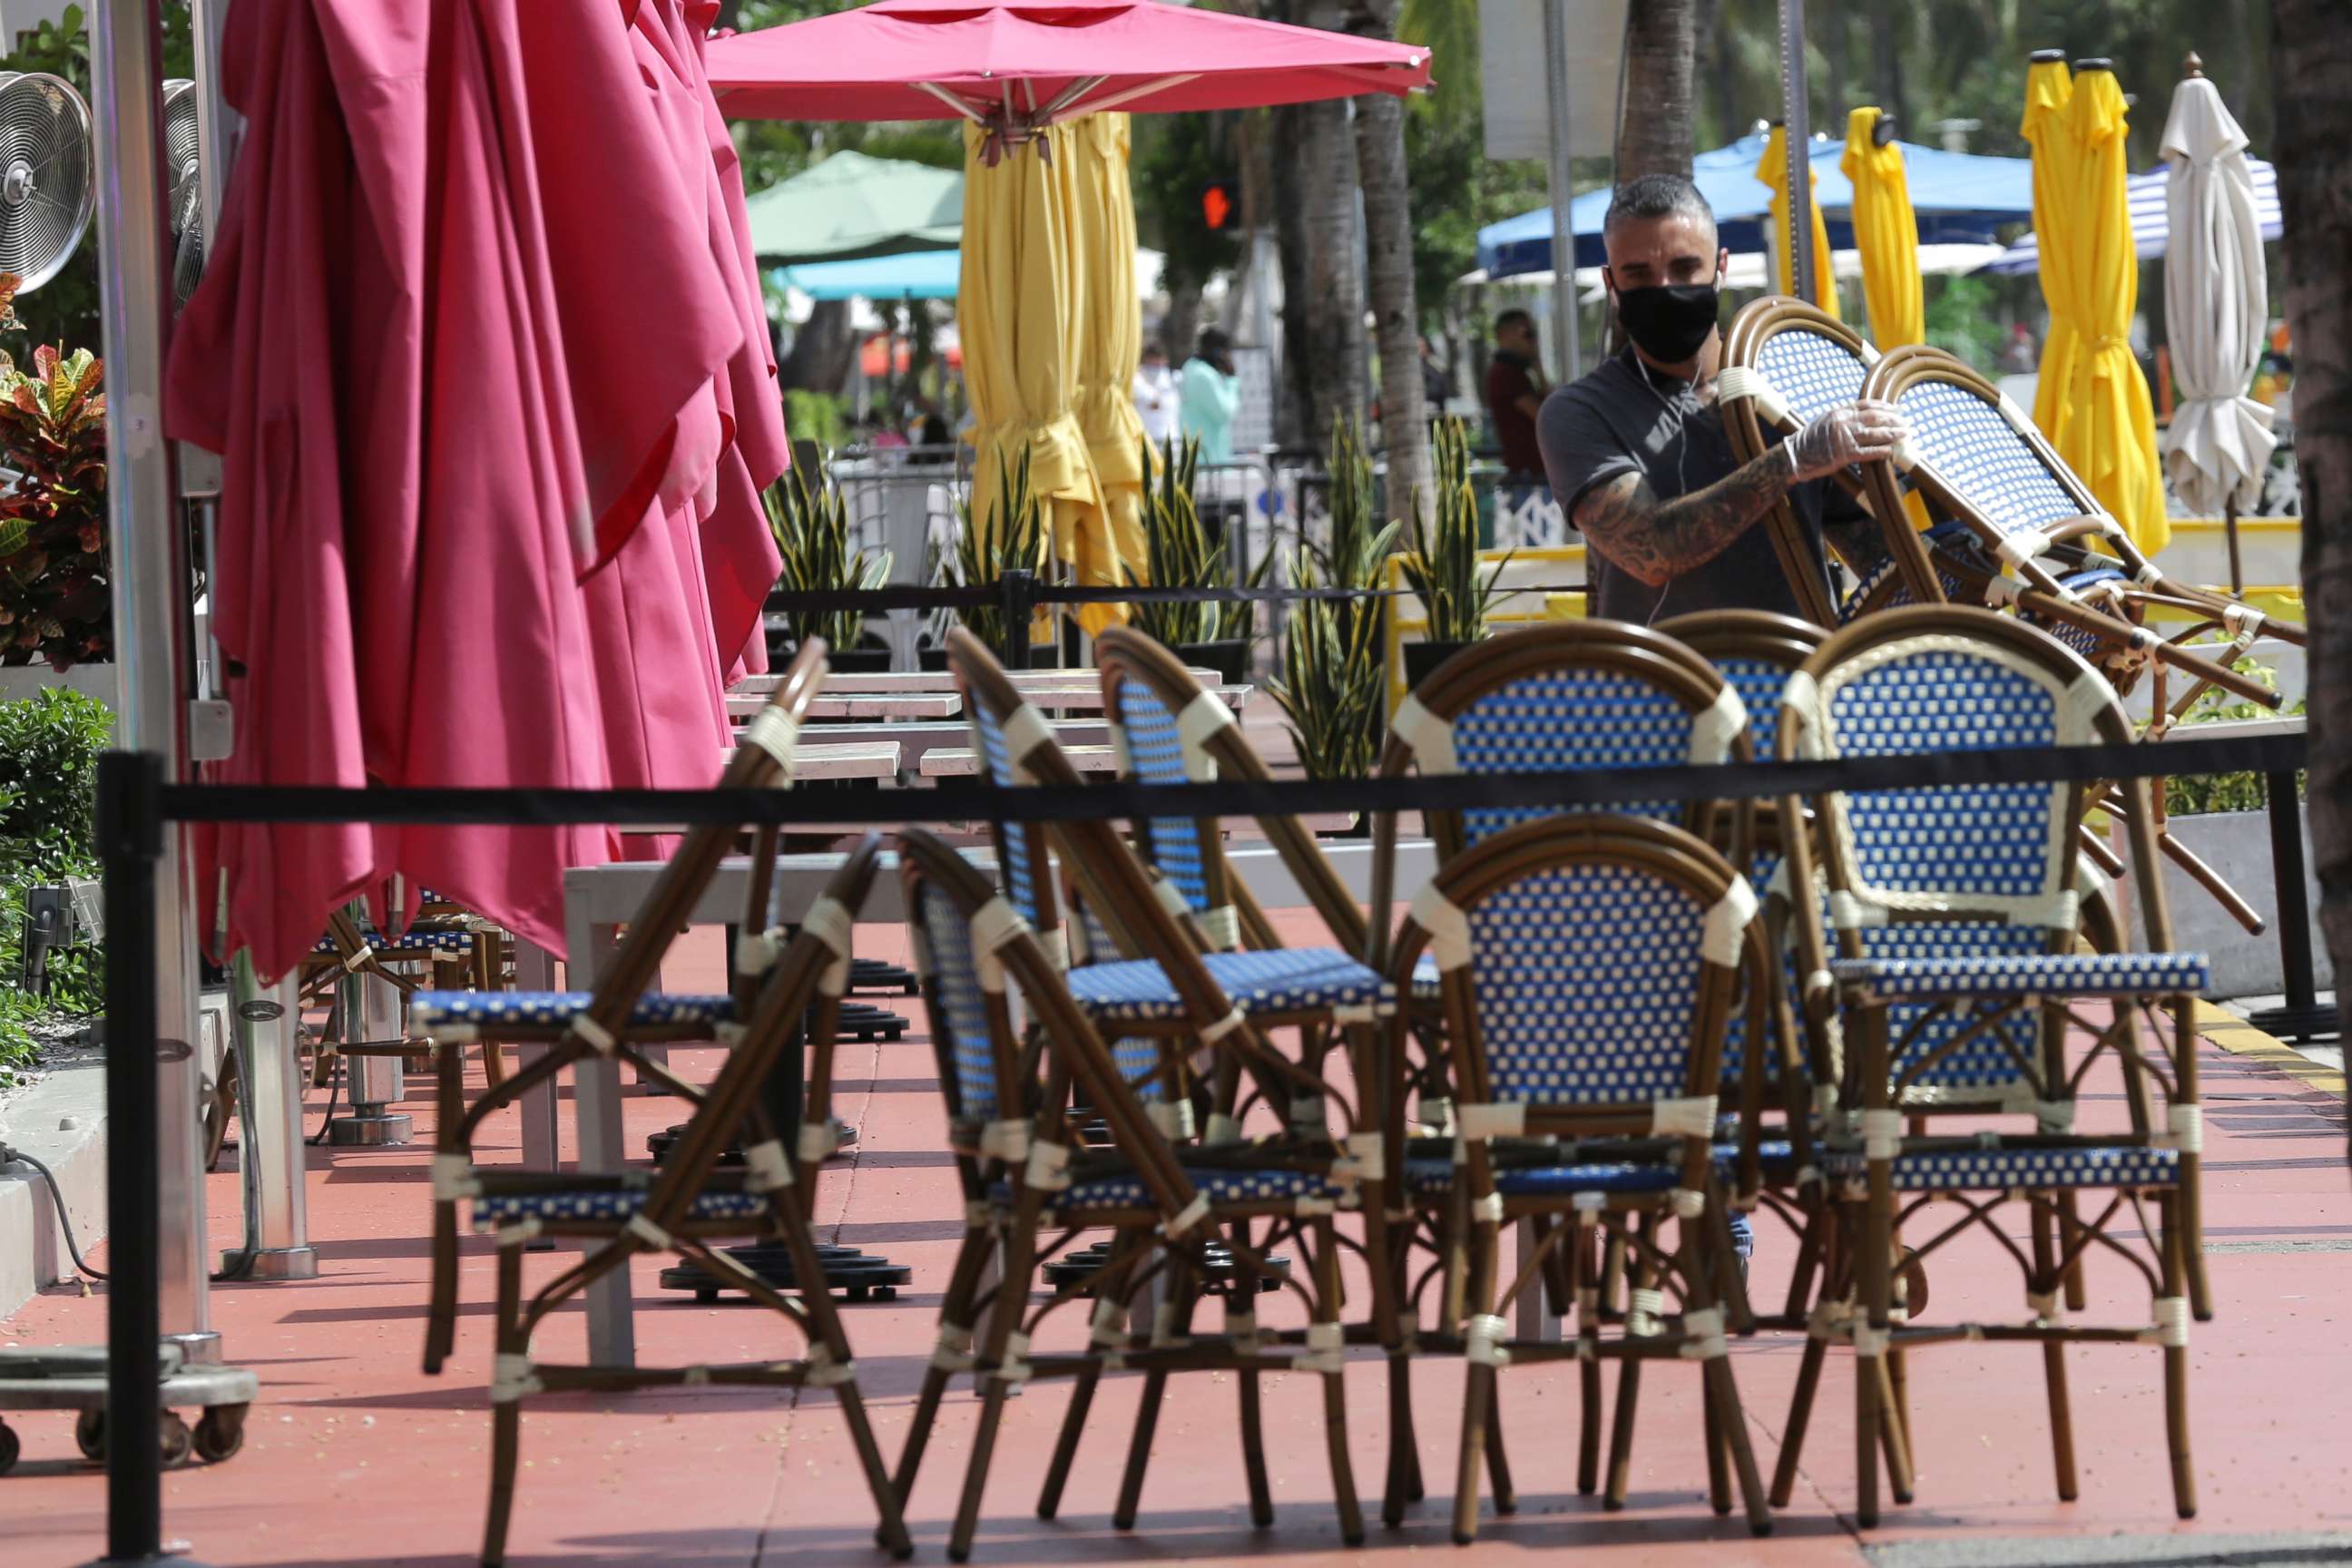 PHOTO: An employee at the Clevelander bar and restaurant on Ocean Drive stacks chairs as they have shut down due to public health concerns caused by COVID-19 during the coronavirus pandemic, July 13, 2020, in Miami Beach, Fla.